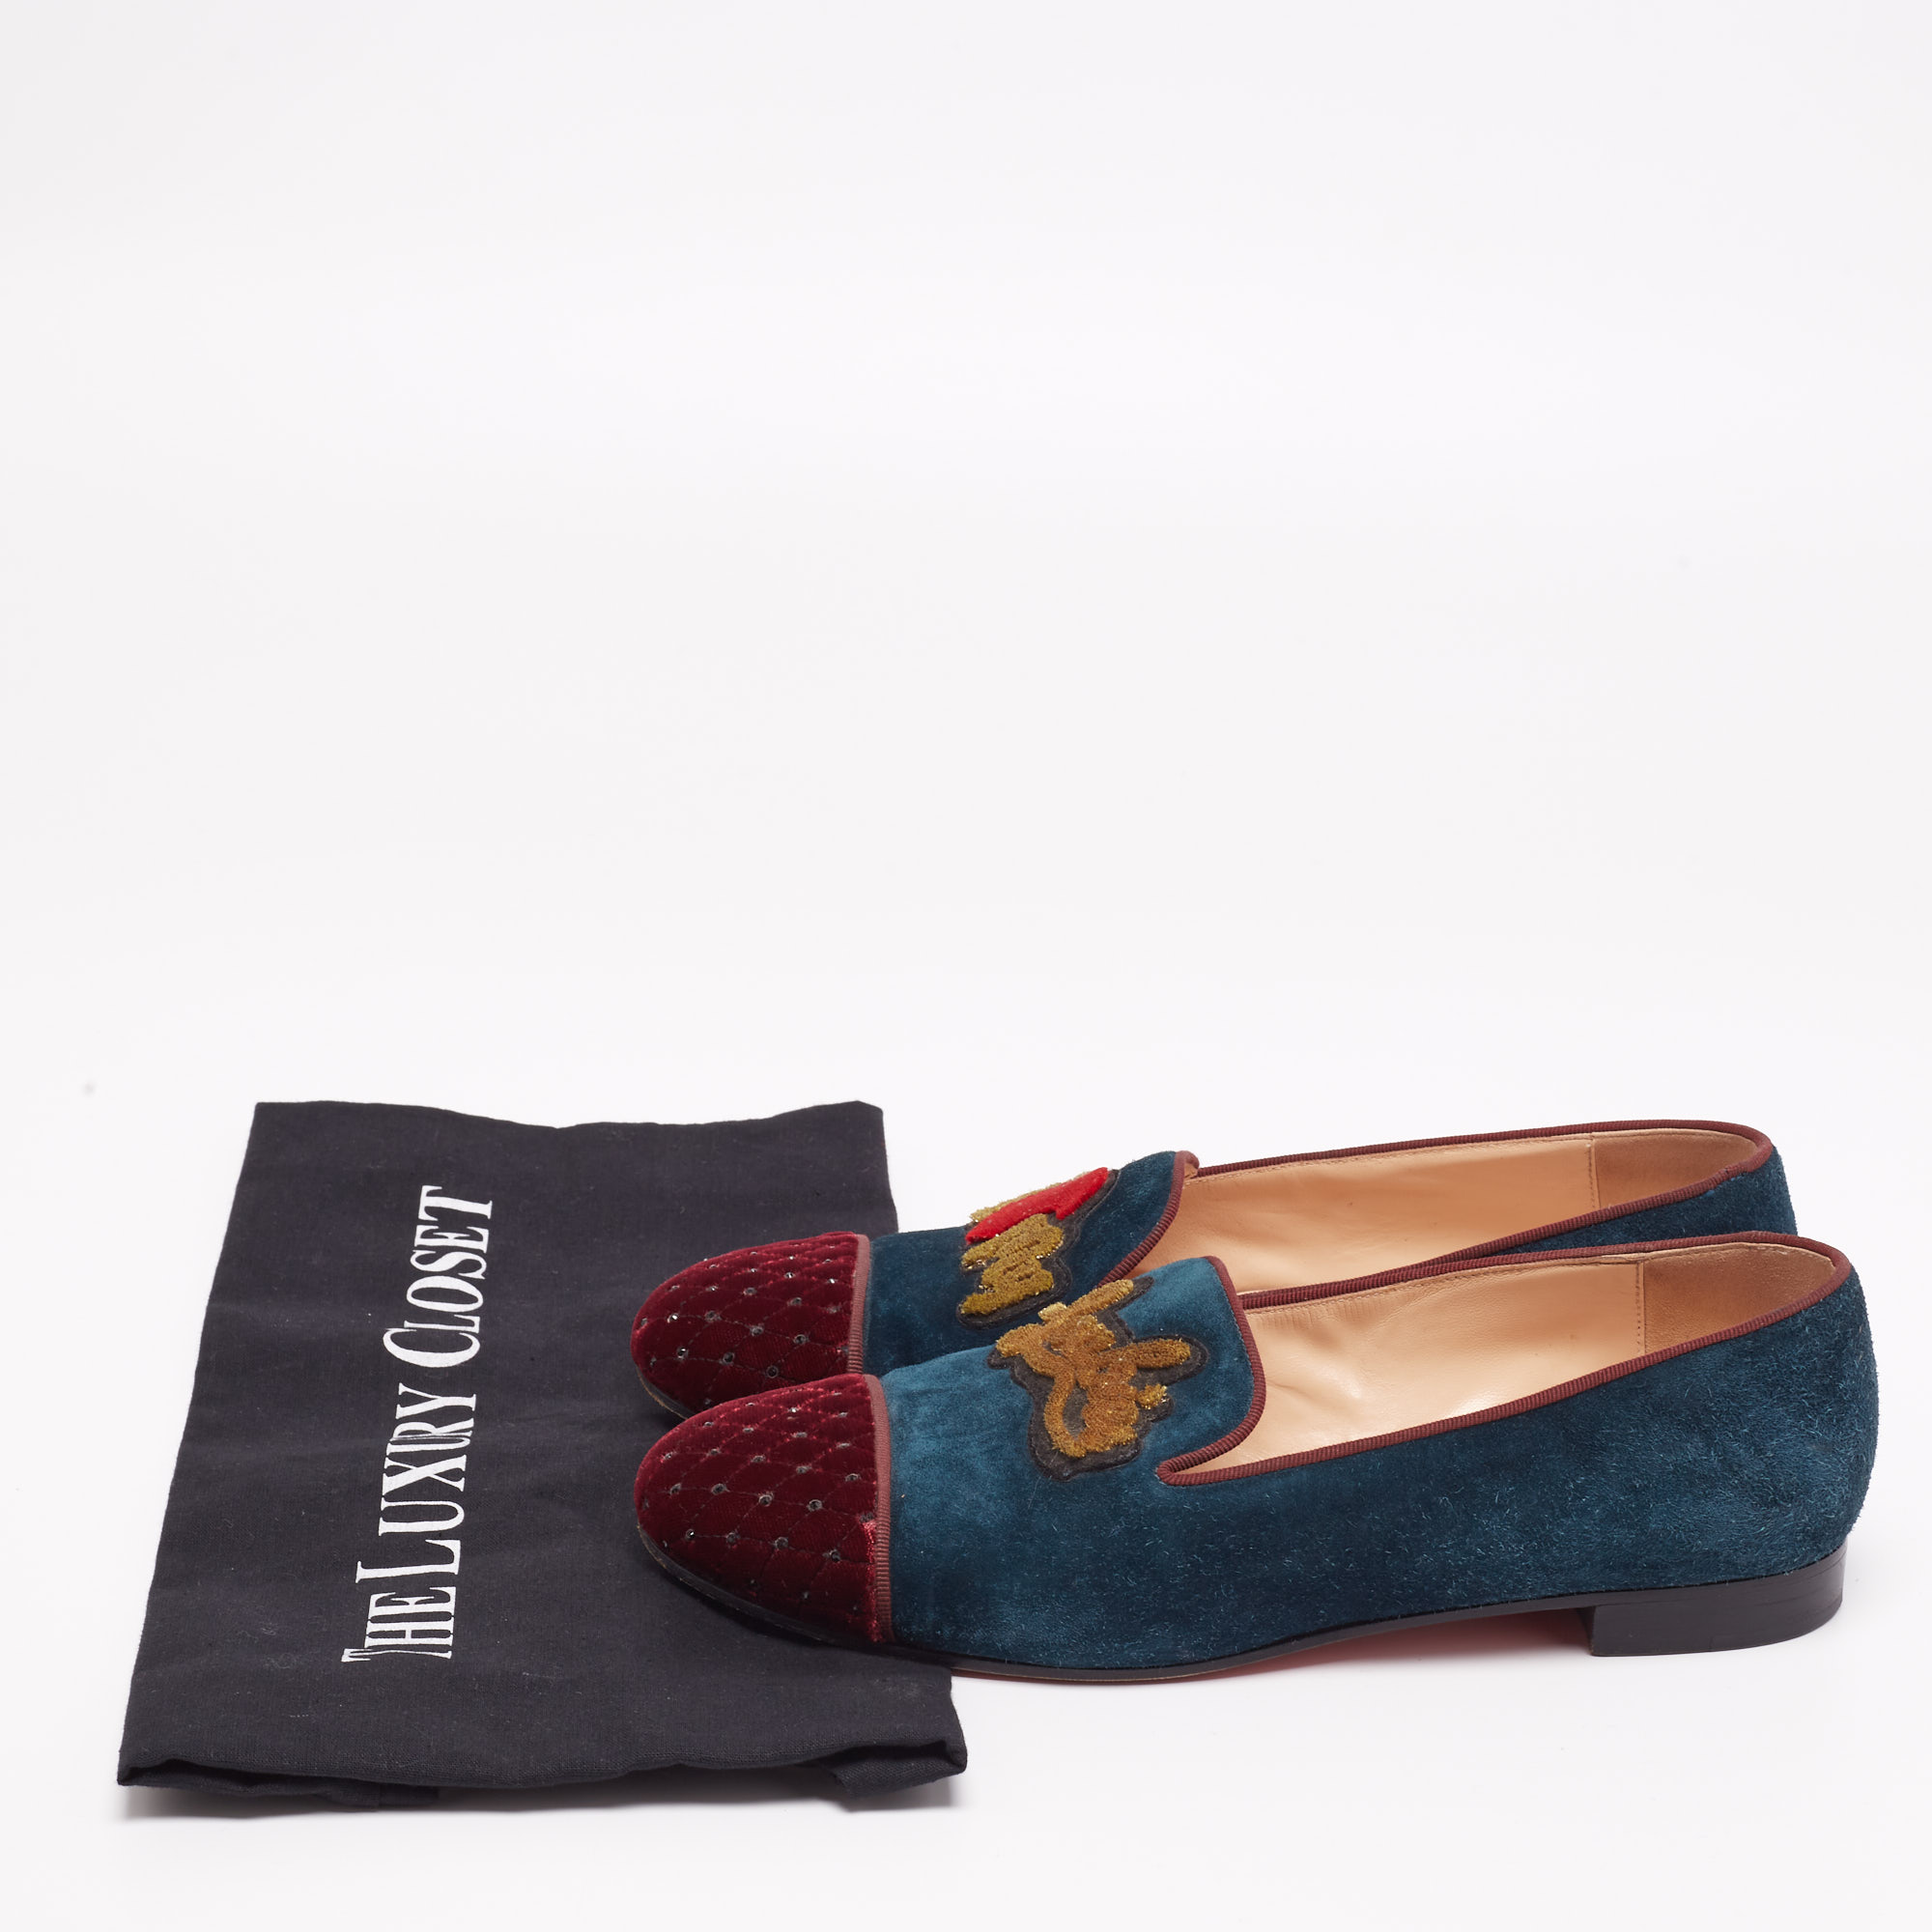 Christian Louboutin Tricolor Suede And Velvet I Love My Loubies Loafers Size 38.5